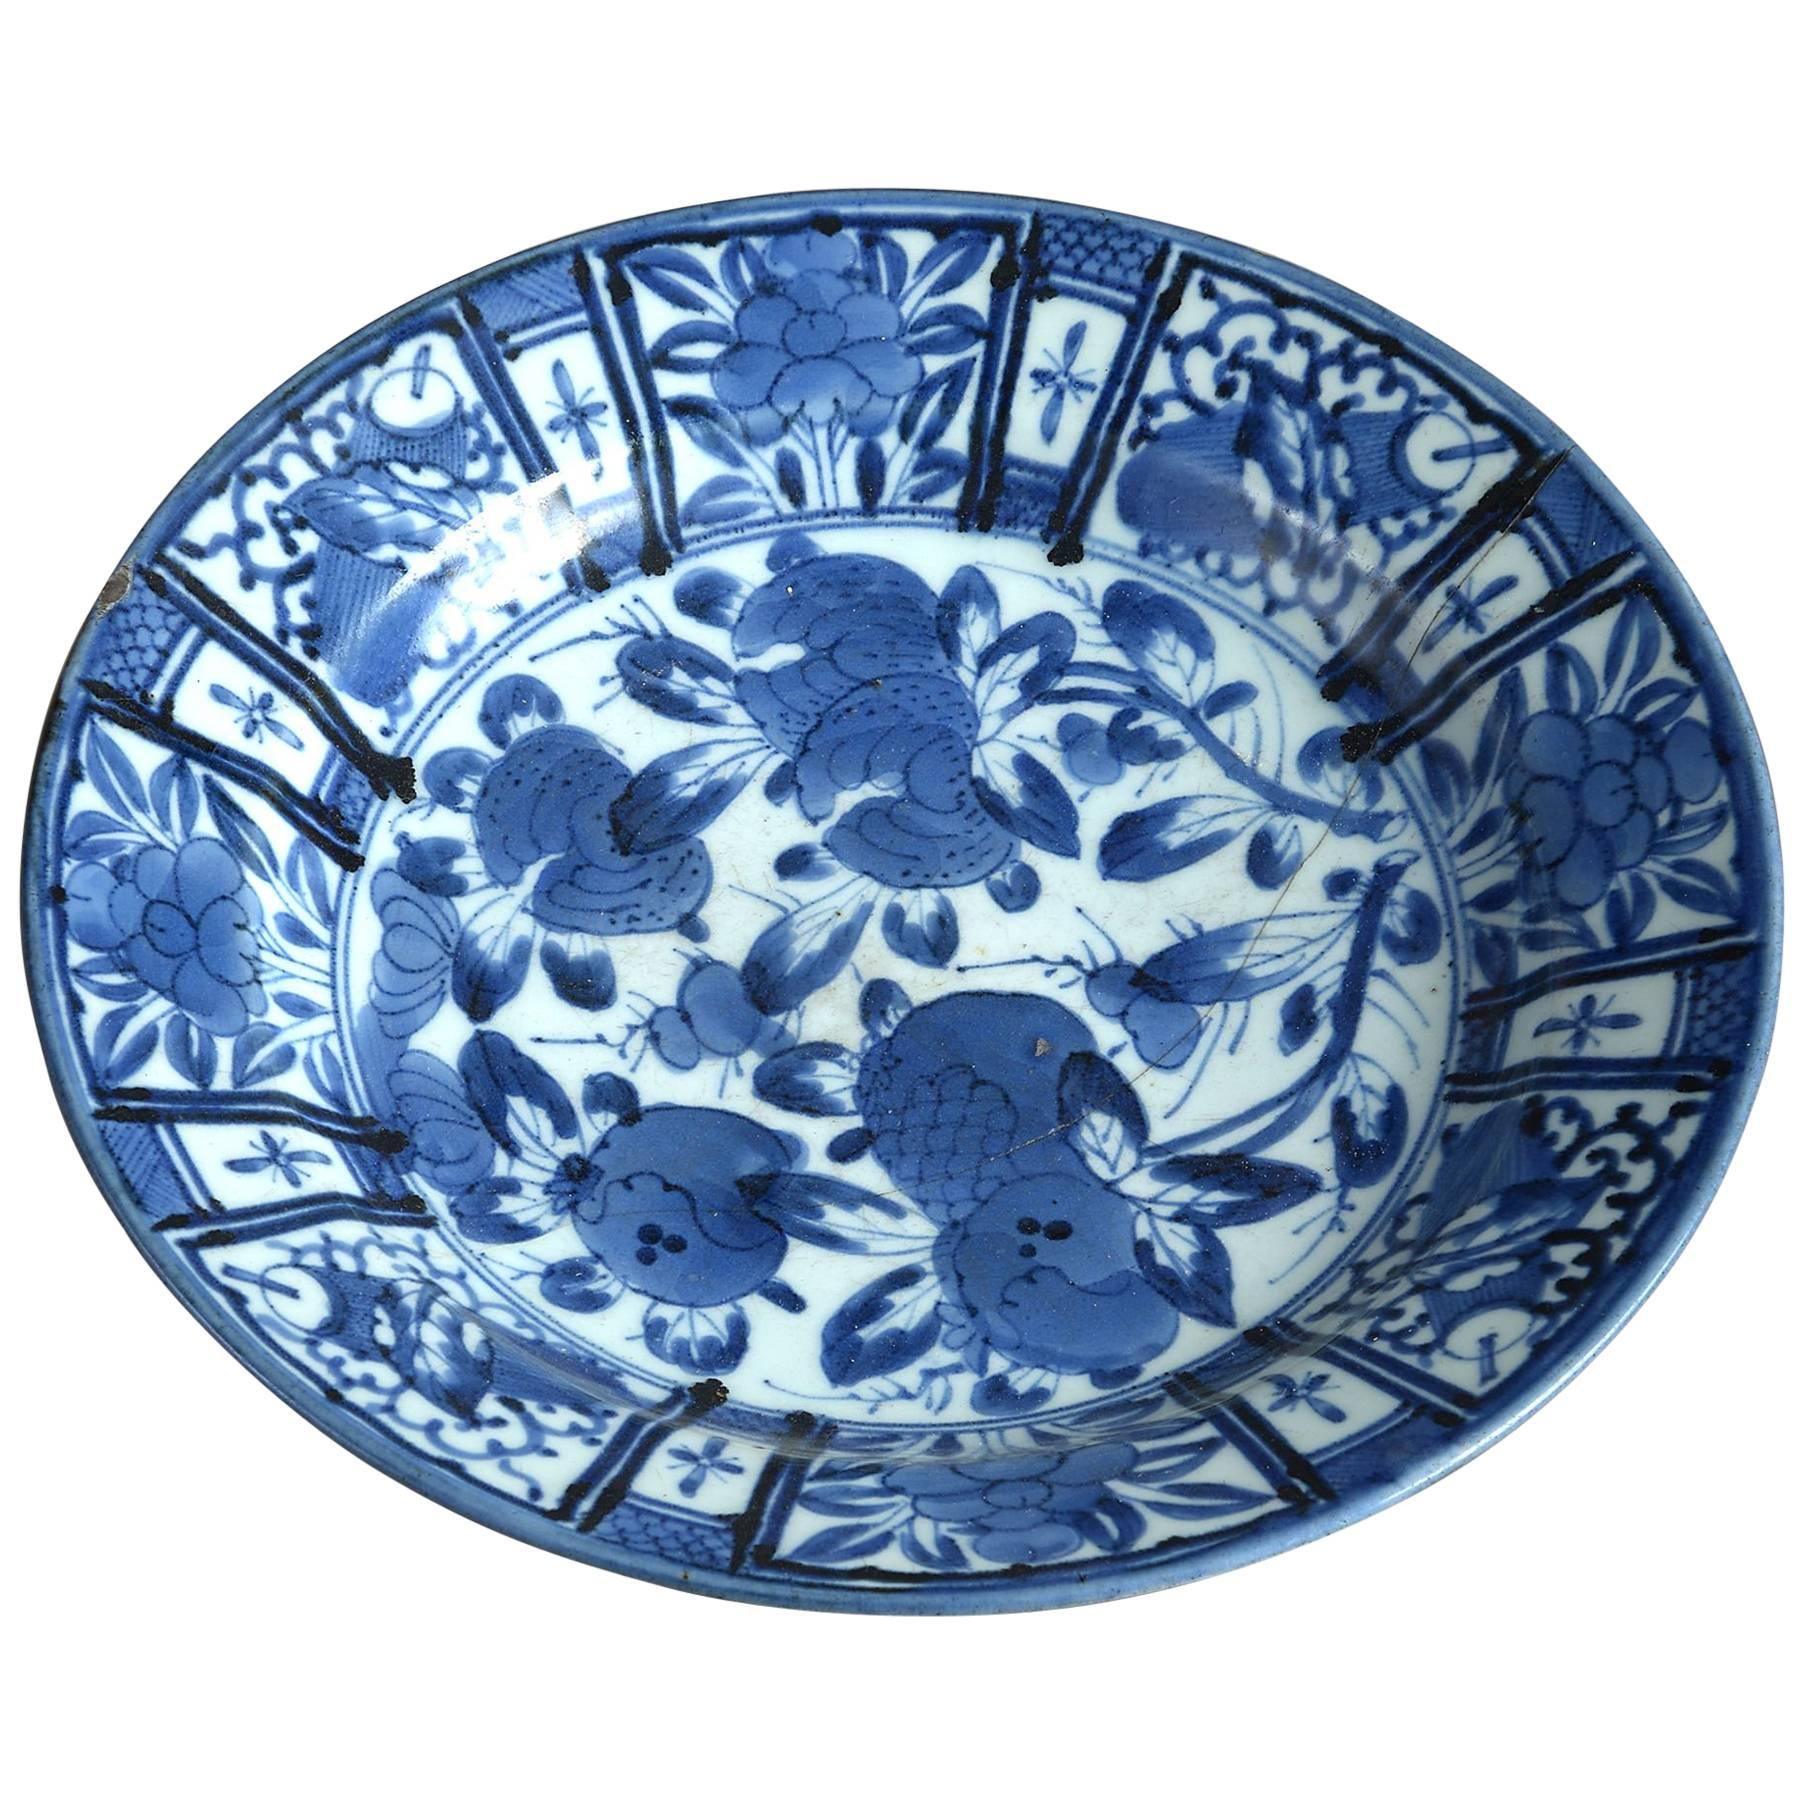 17th Century Blue and White Porcelain Charger